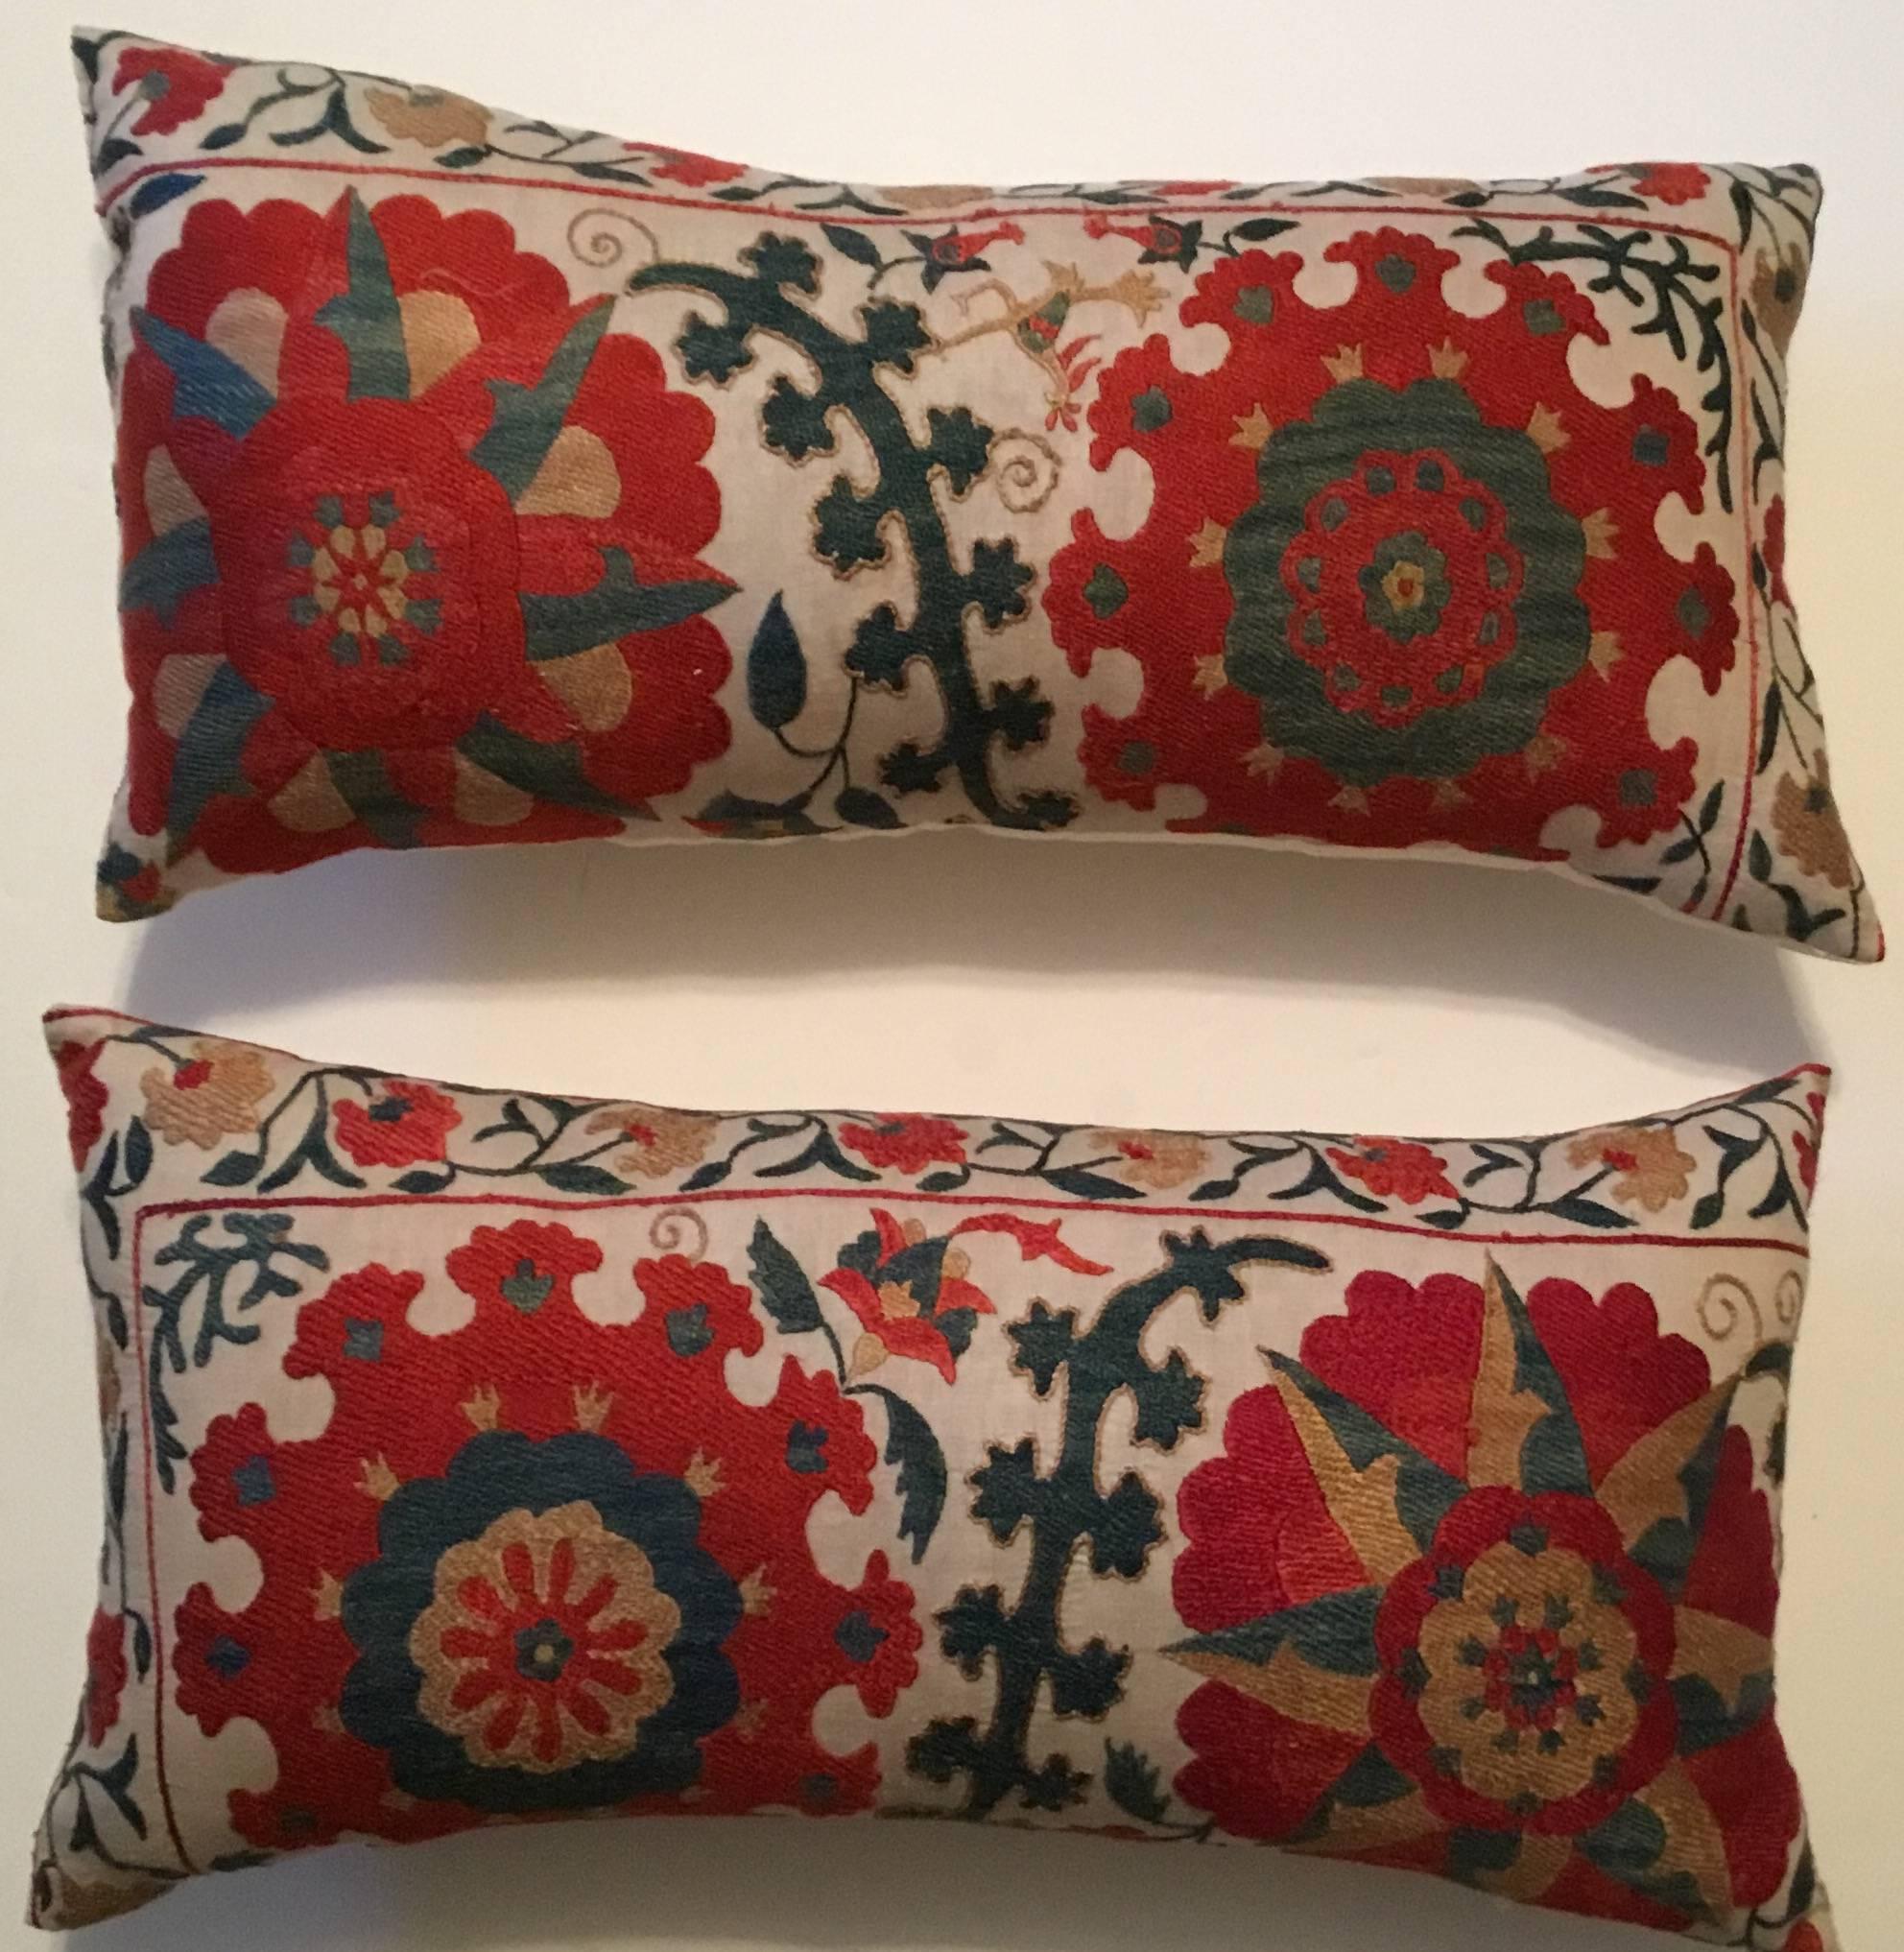 Colorful pair of pillows made of hand embroidery silk on cream color background, with flowers and vines motif.
Fresh inserts, silk backing.